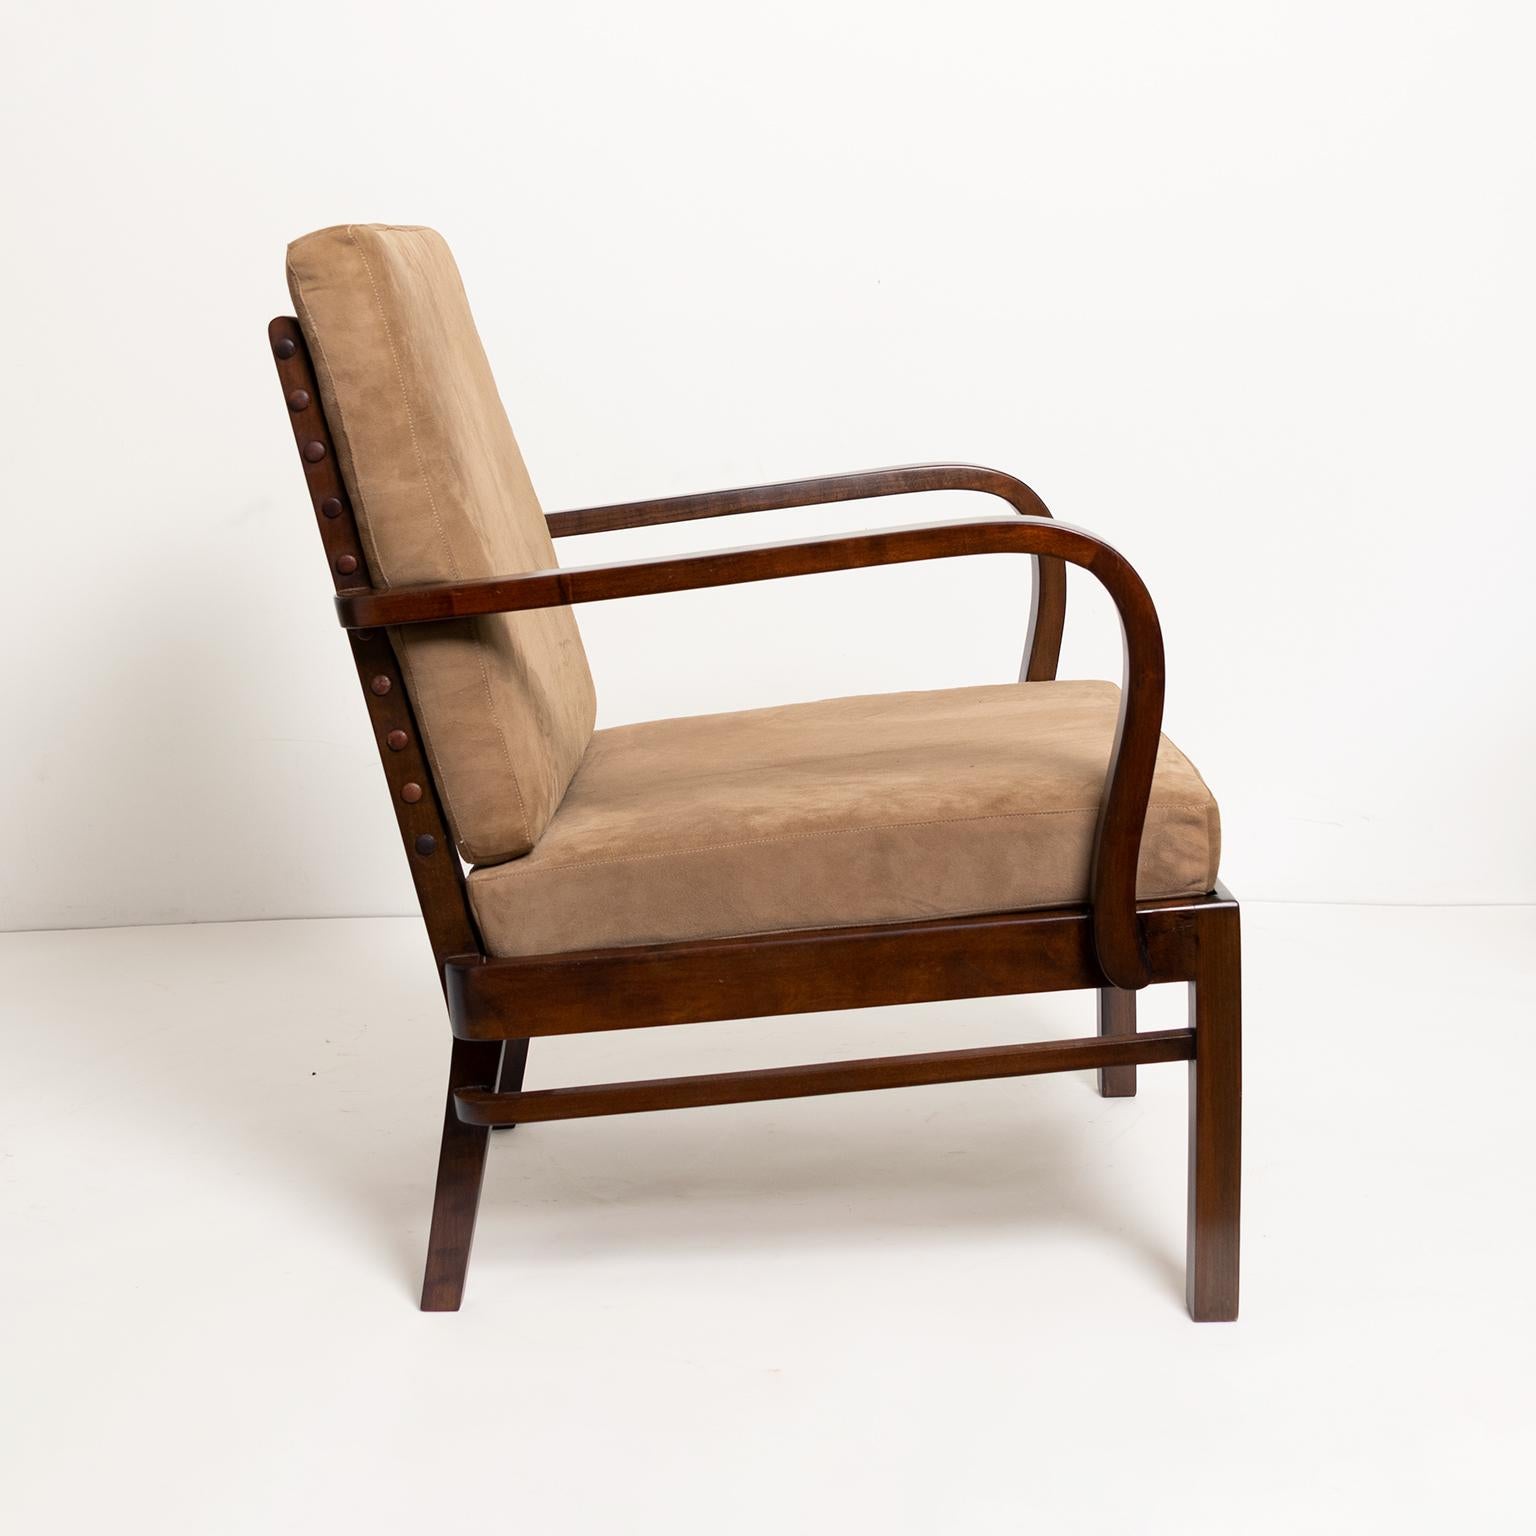 Stained Modernist 1920s Lounge Chair Designed by Wilhelm Knoll for Knoll Antimott